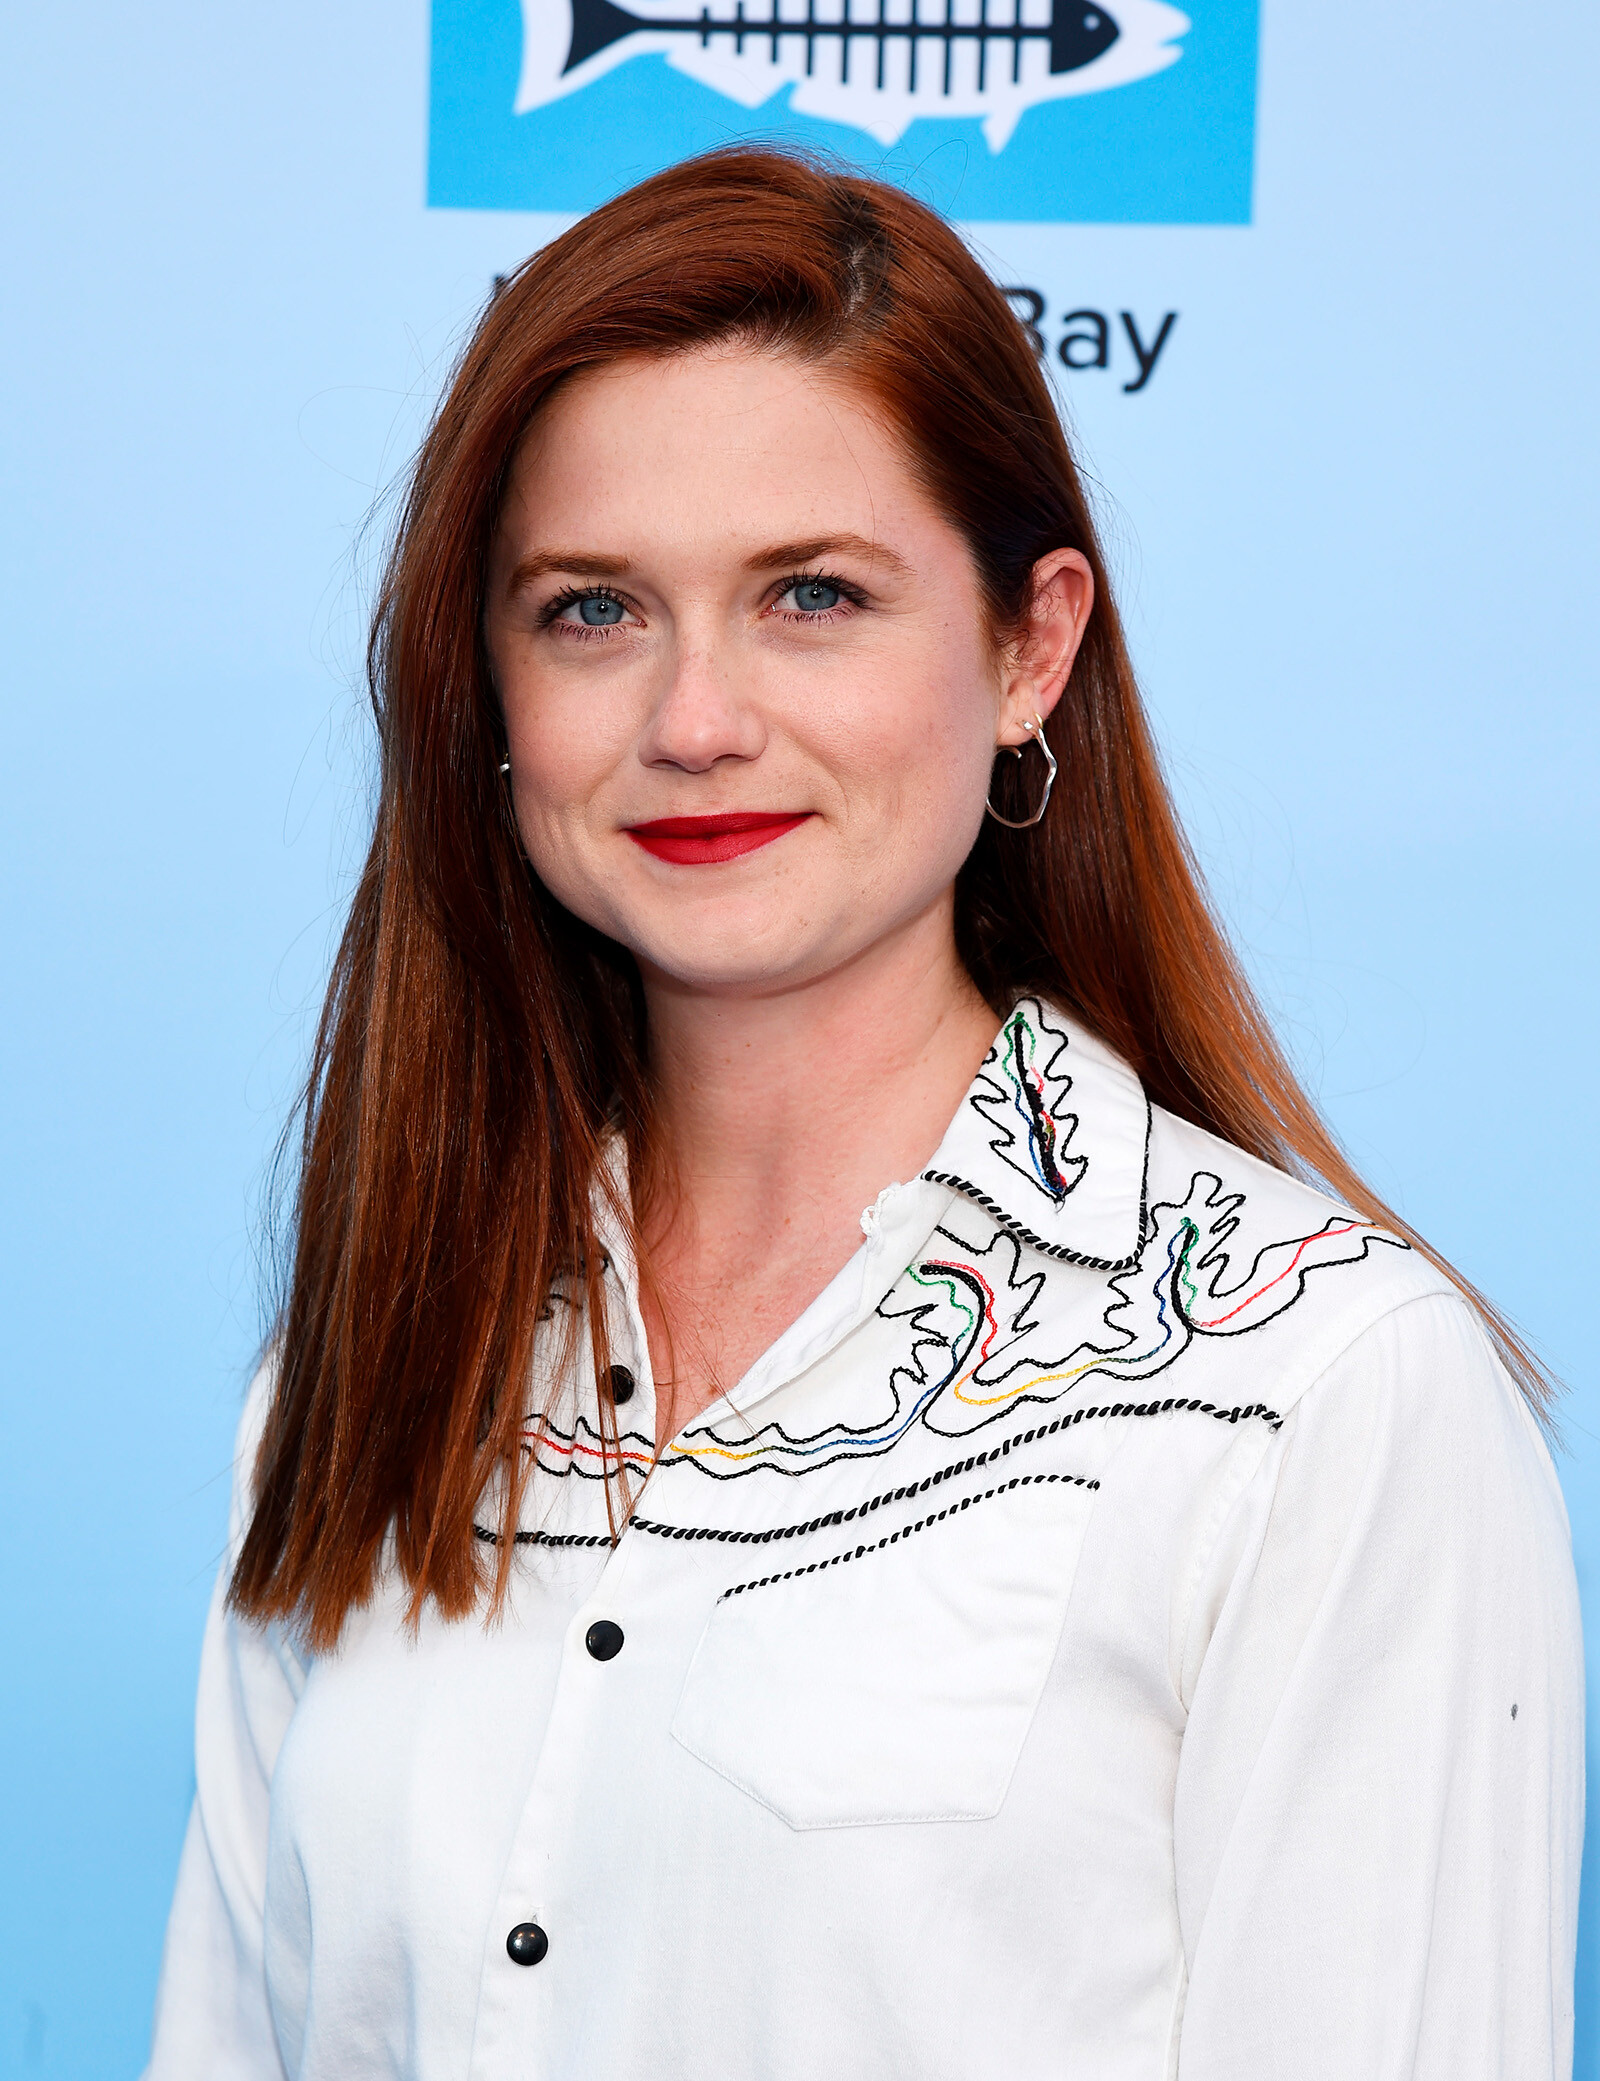 Bonnie-Wright-is-disappointed-with-Ginny-in-Harry-Potter-01-Mainstyle.jpg